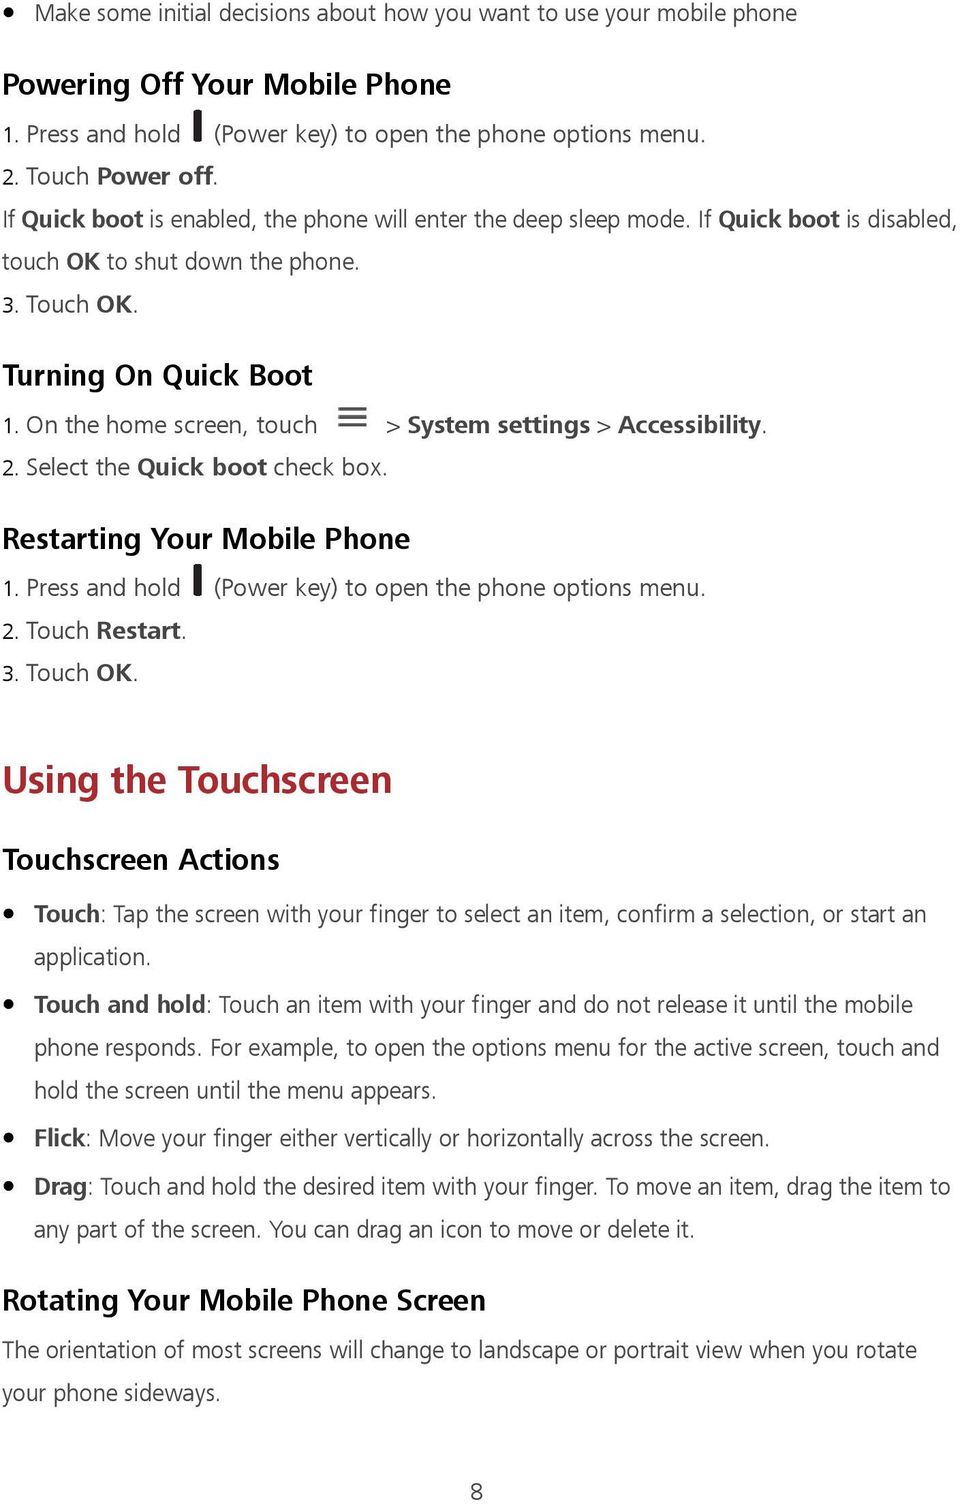 On the home screen, touch > System settings > Accessibility. 2. Select the Quick boot check box. Restarting Your Mobile Phone 1. Press and hold (Power key) to open the phone options menu. 2. Touch Restart.